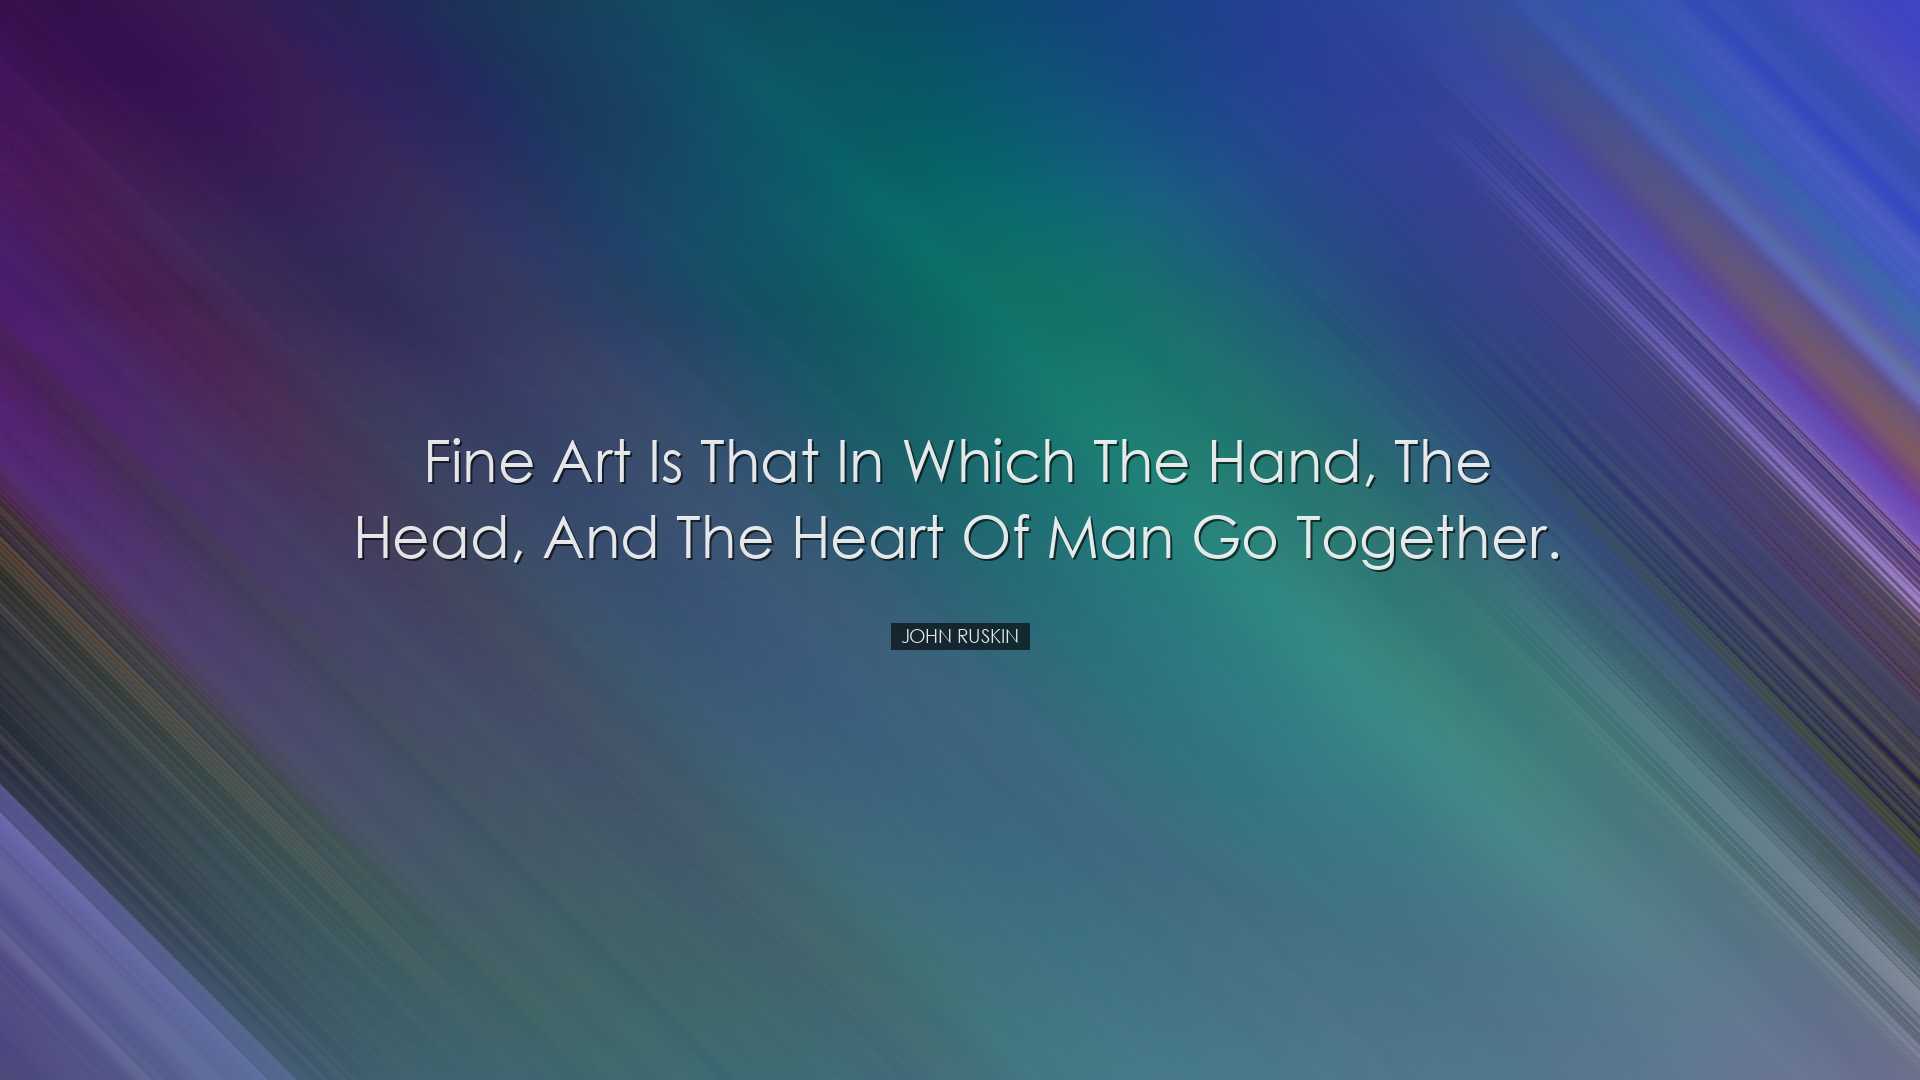 Fine art is that in which the hand, the head, and the heart of man